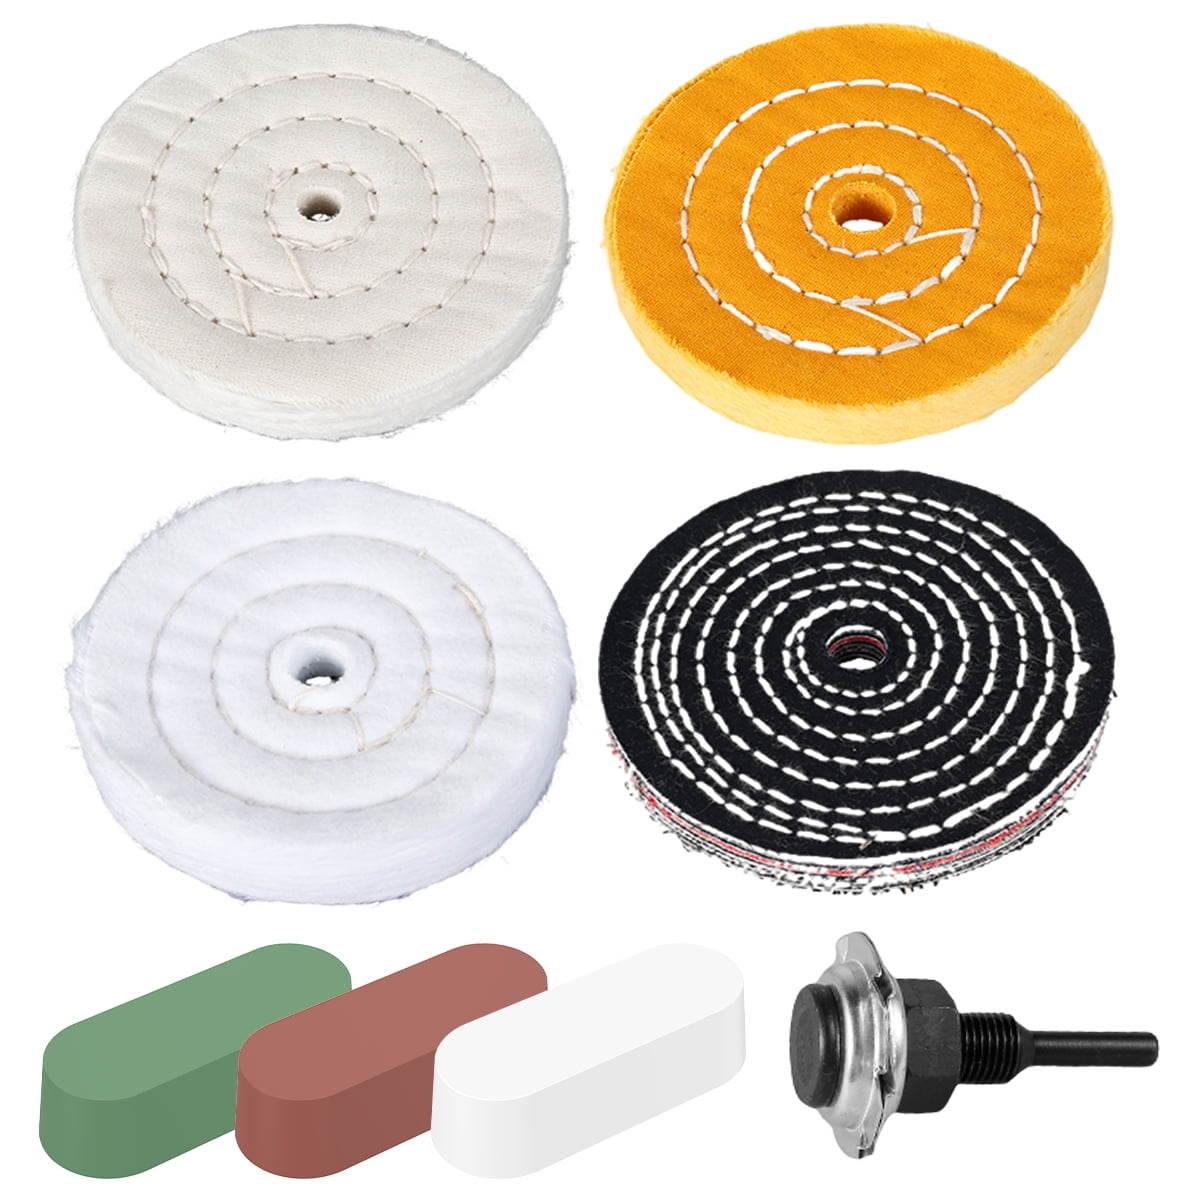 Lieonvis Polishing Wheel 4 Inch Wear Resistant Reusable Buffing Wheel  Professional Polishing Accessories Kit with Polish Compound for Wood  Plastic Metal Ceramic Glass 